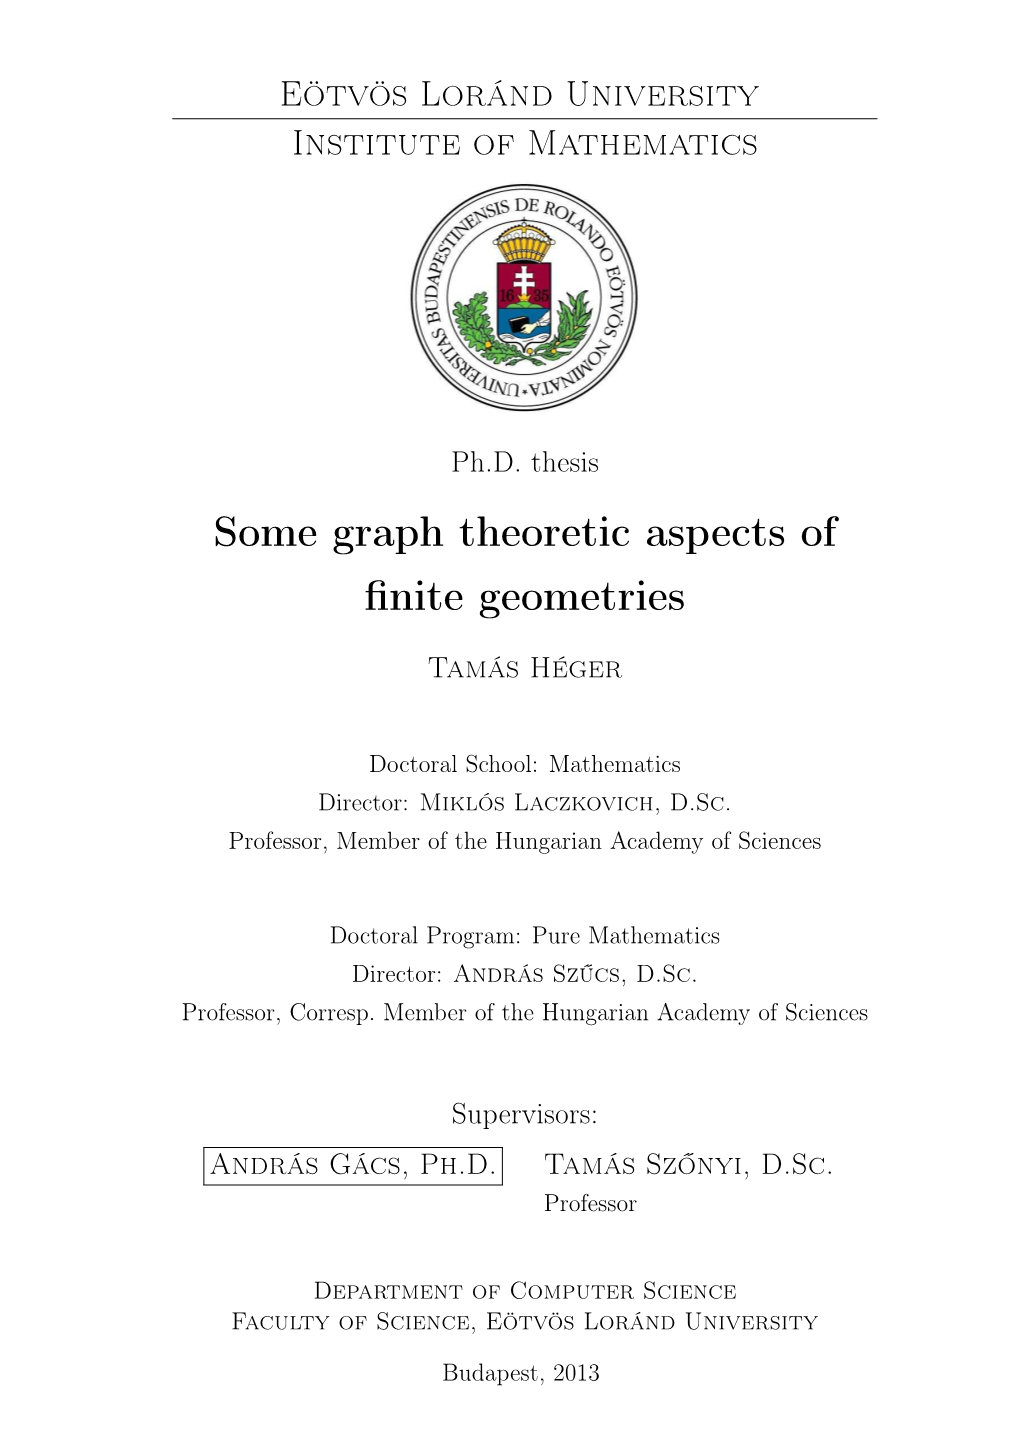 Some Graph Theoretic Aspects of Finite Geometries